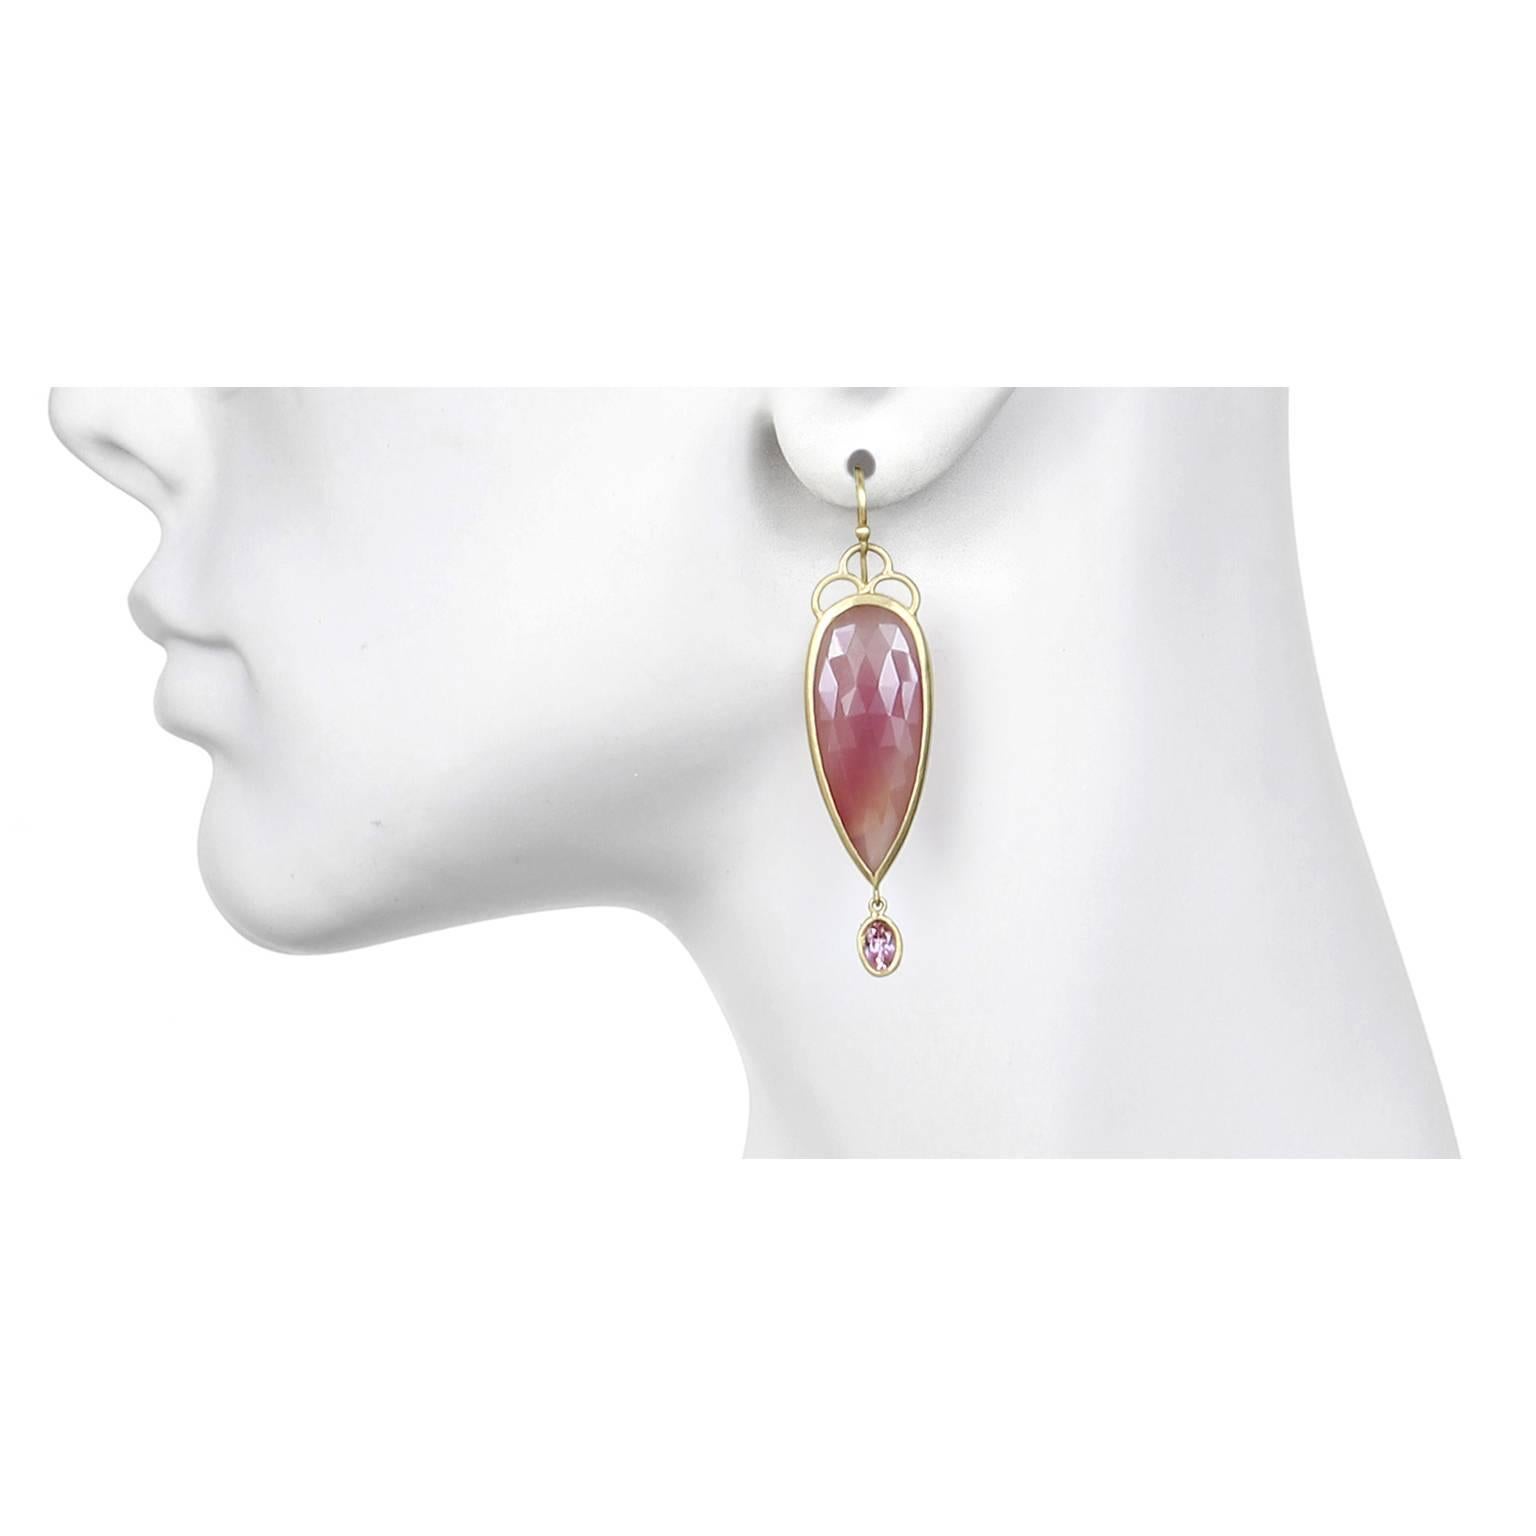 Contemporary Faye Kim Rose Cut Pink Sapphire Imperial Topaz Gold Drop Earrings